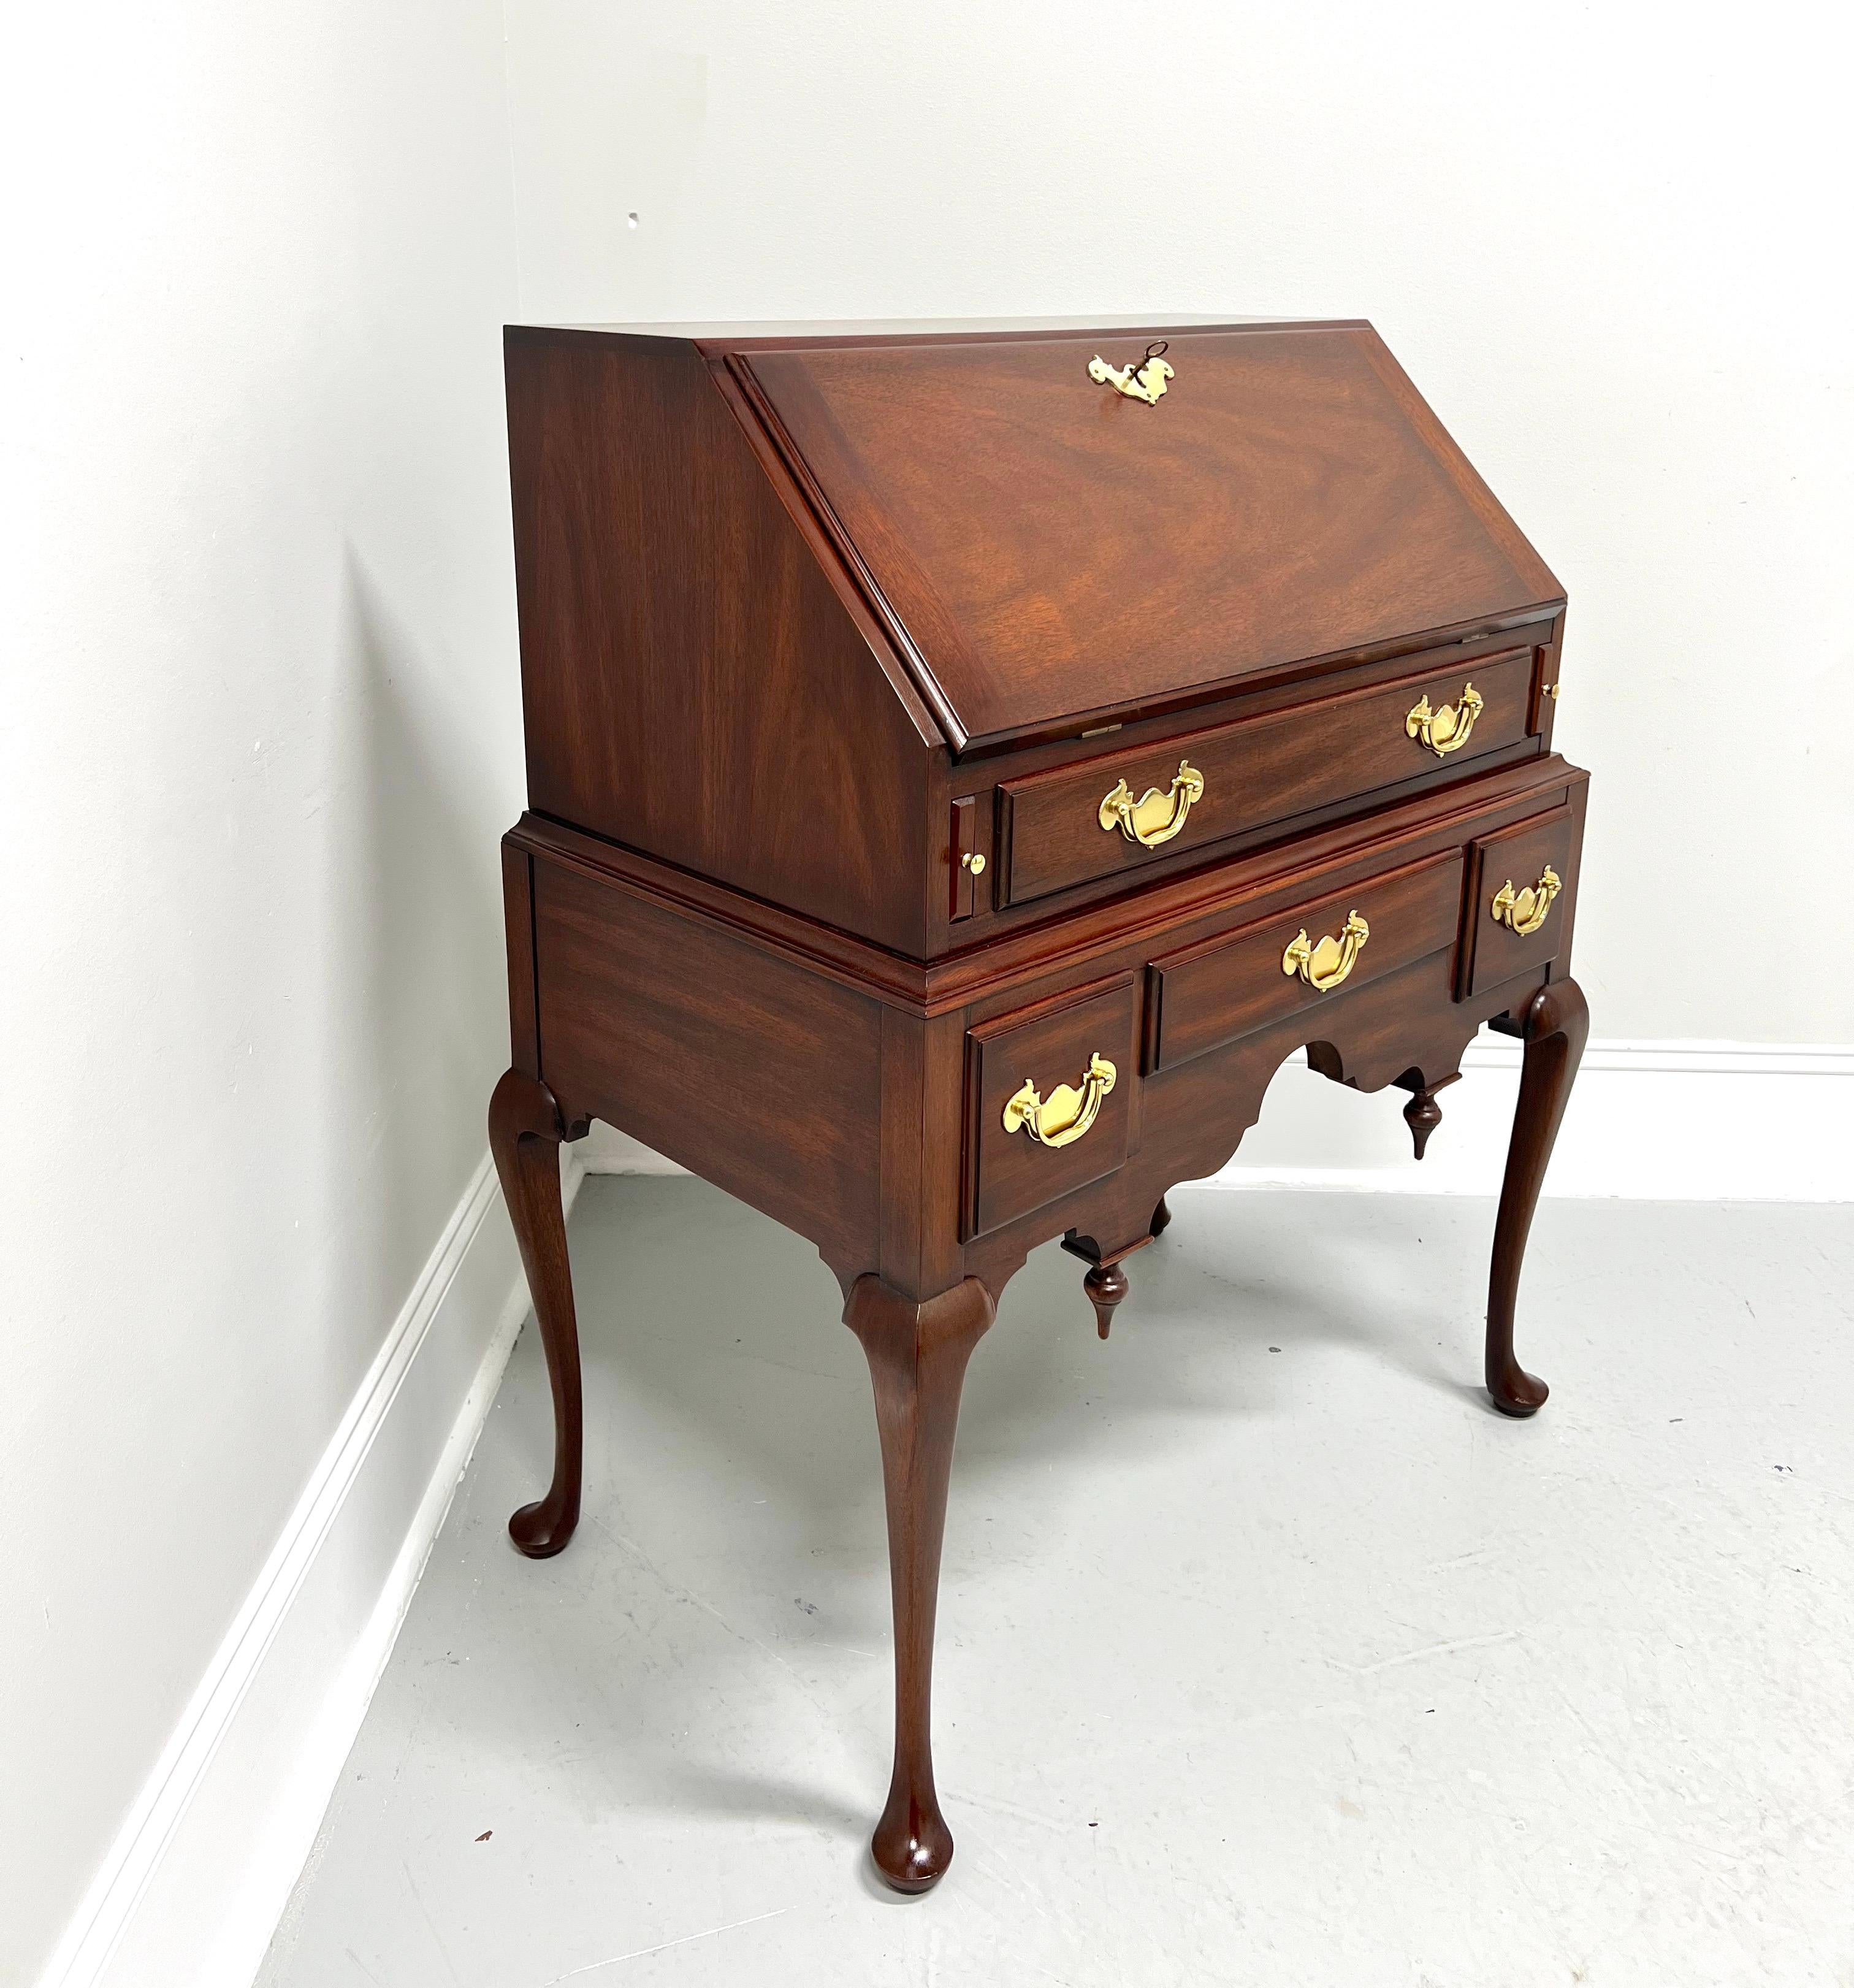 A Queen Anne style drop front secretary desk by Henkel Harris, an SPNEA (Society for the Preservation of New England Antiquities) approved 18th Century reproduction, their Lady Astor. Solid mahogany with brass hardware, slant drop front desk top,